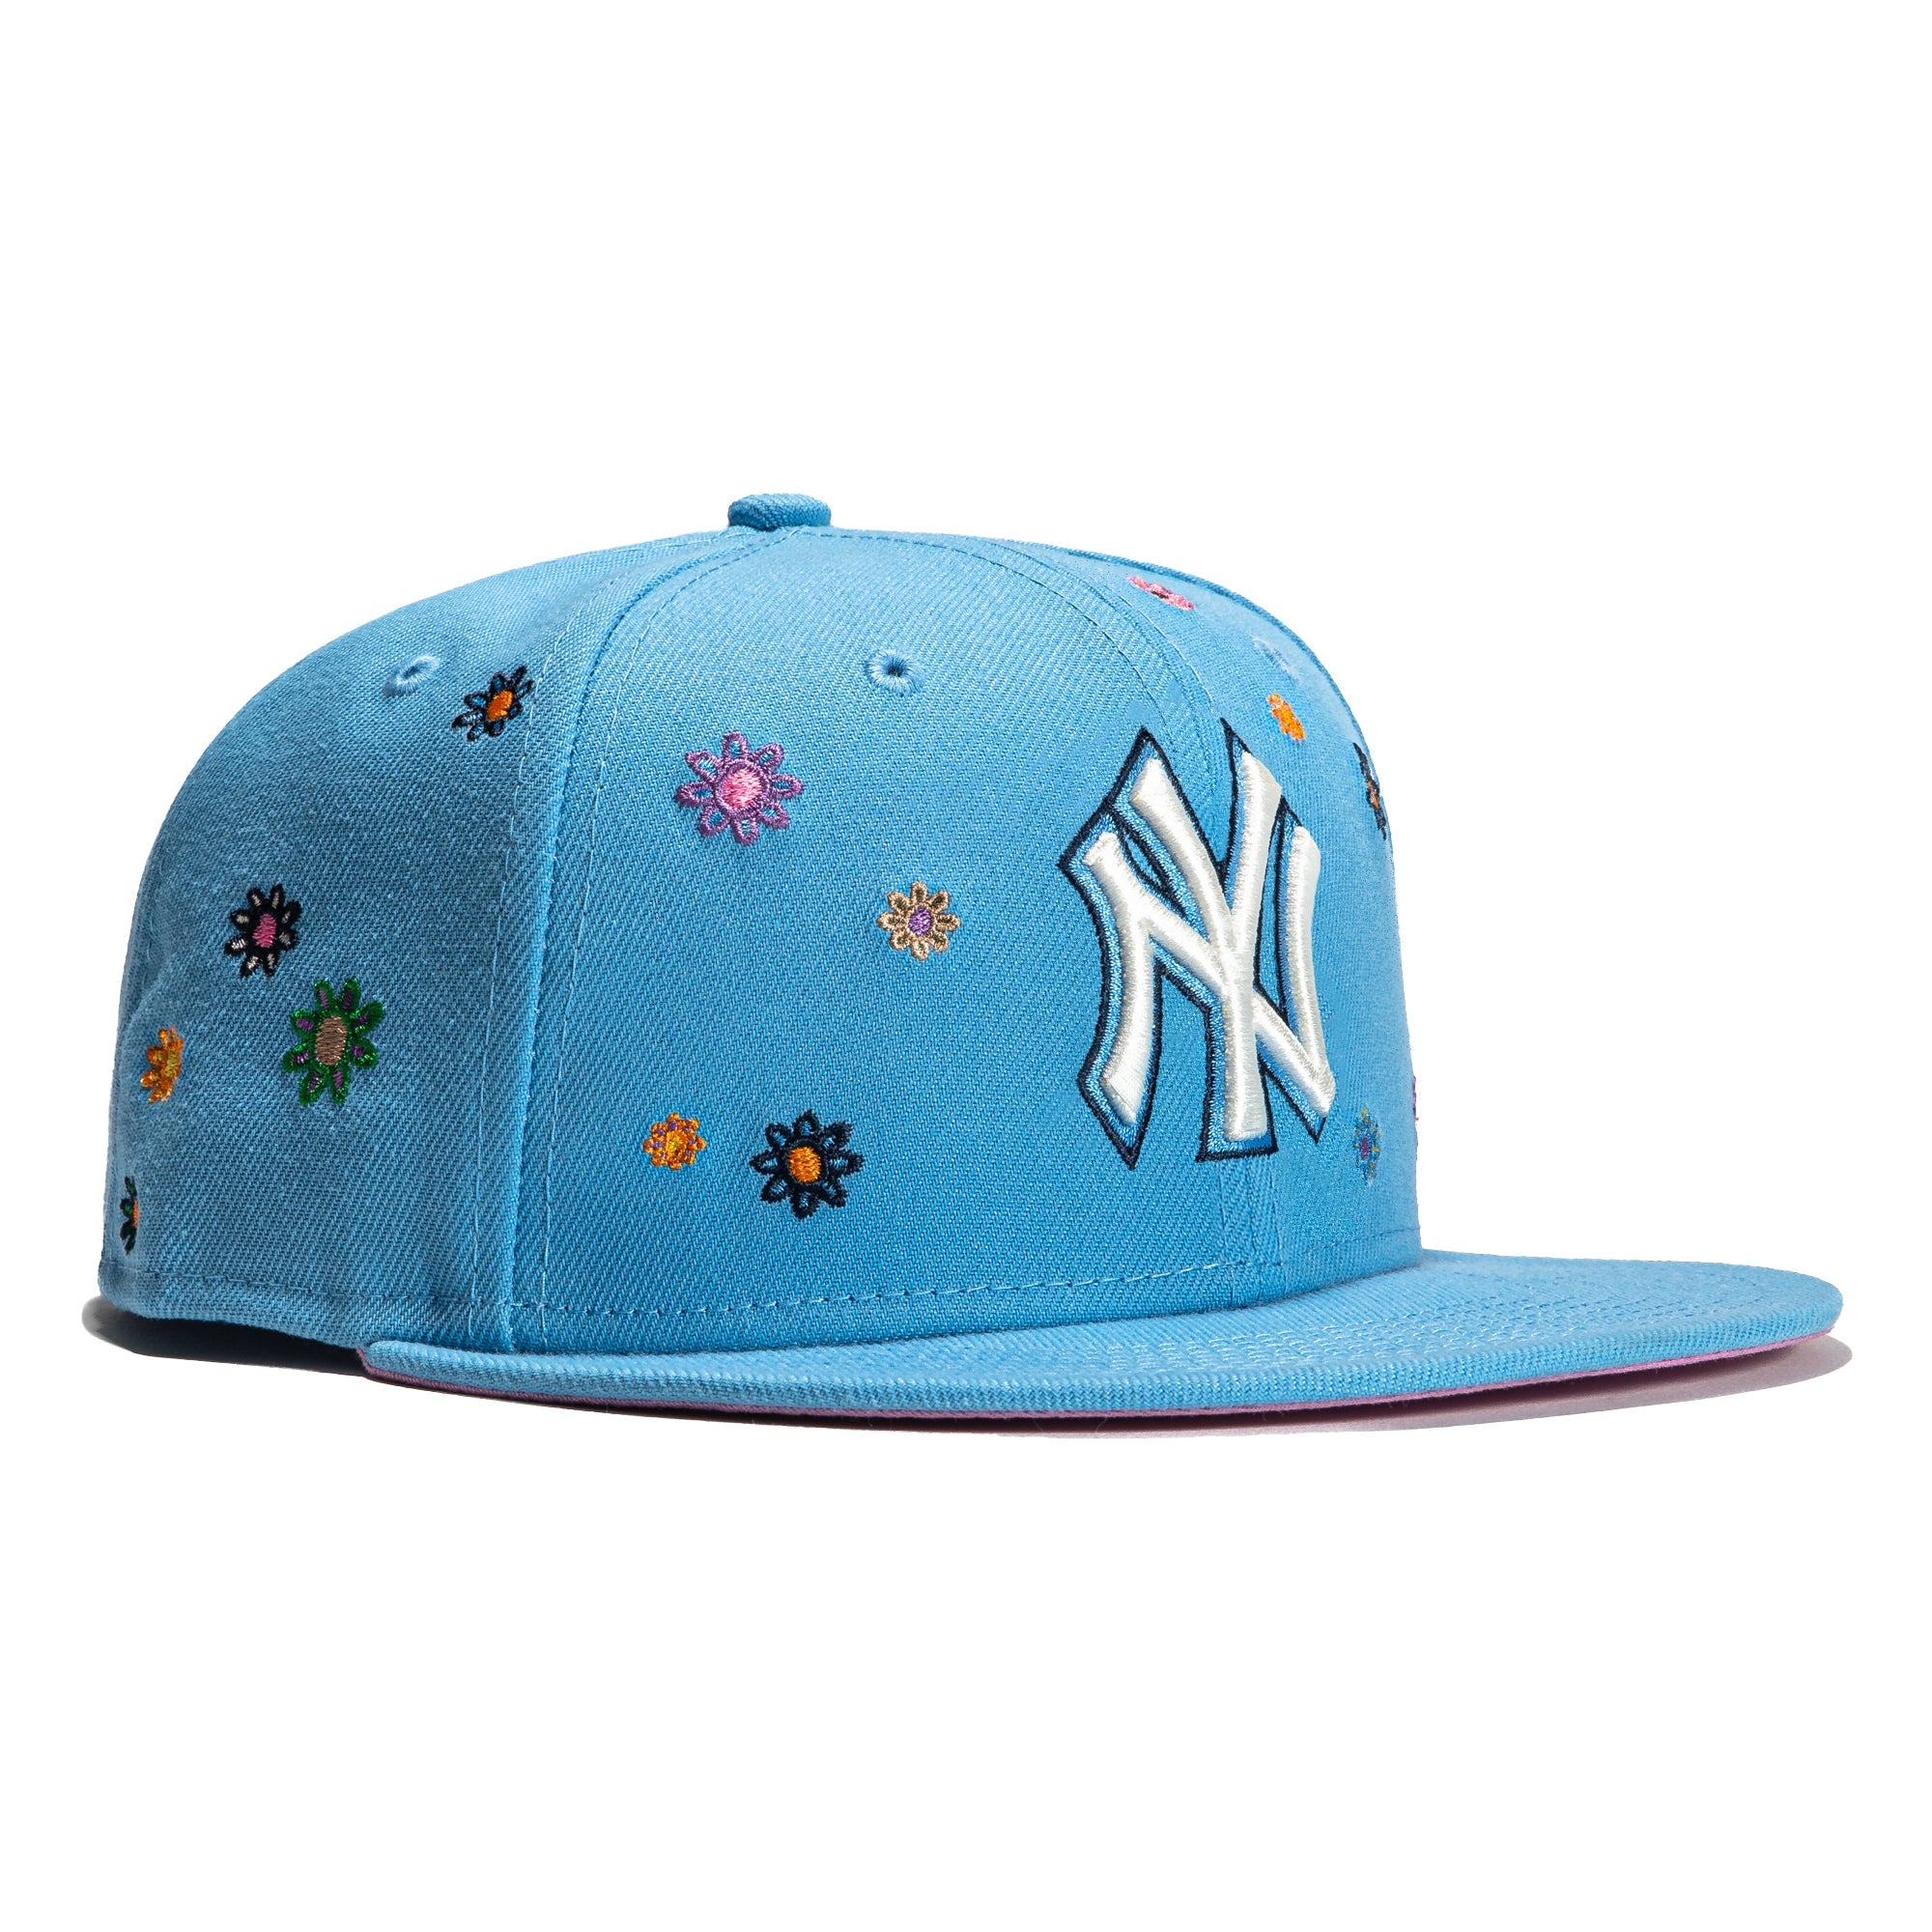 New York Yankees MLB Blooming Navy 59FIFTY Fitted Cap